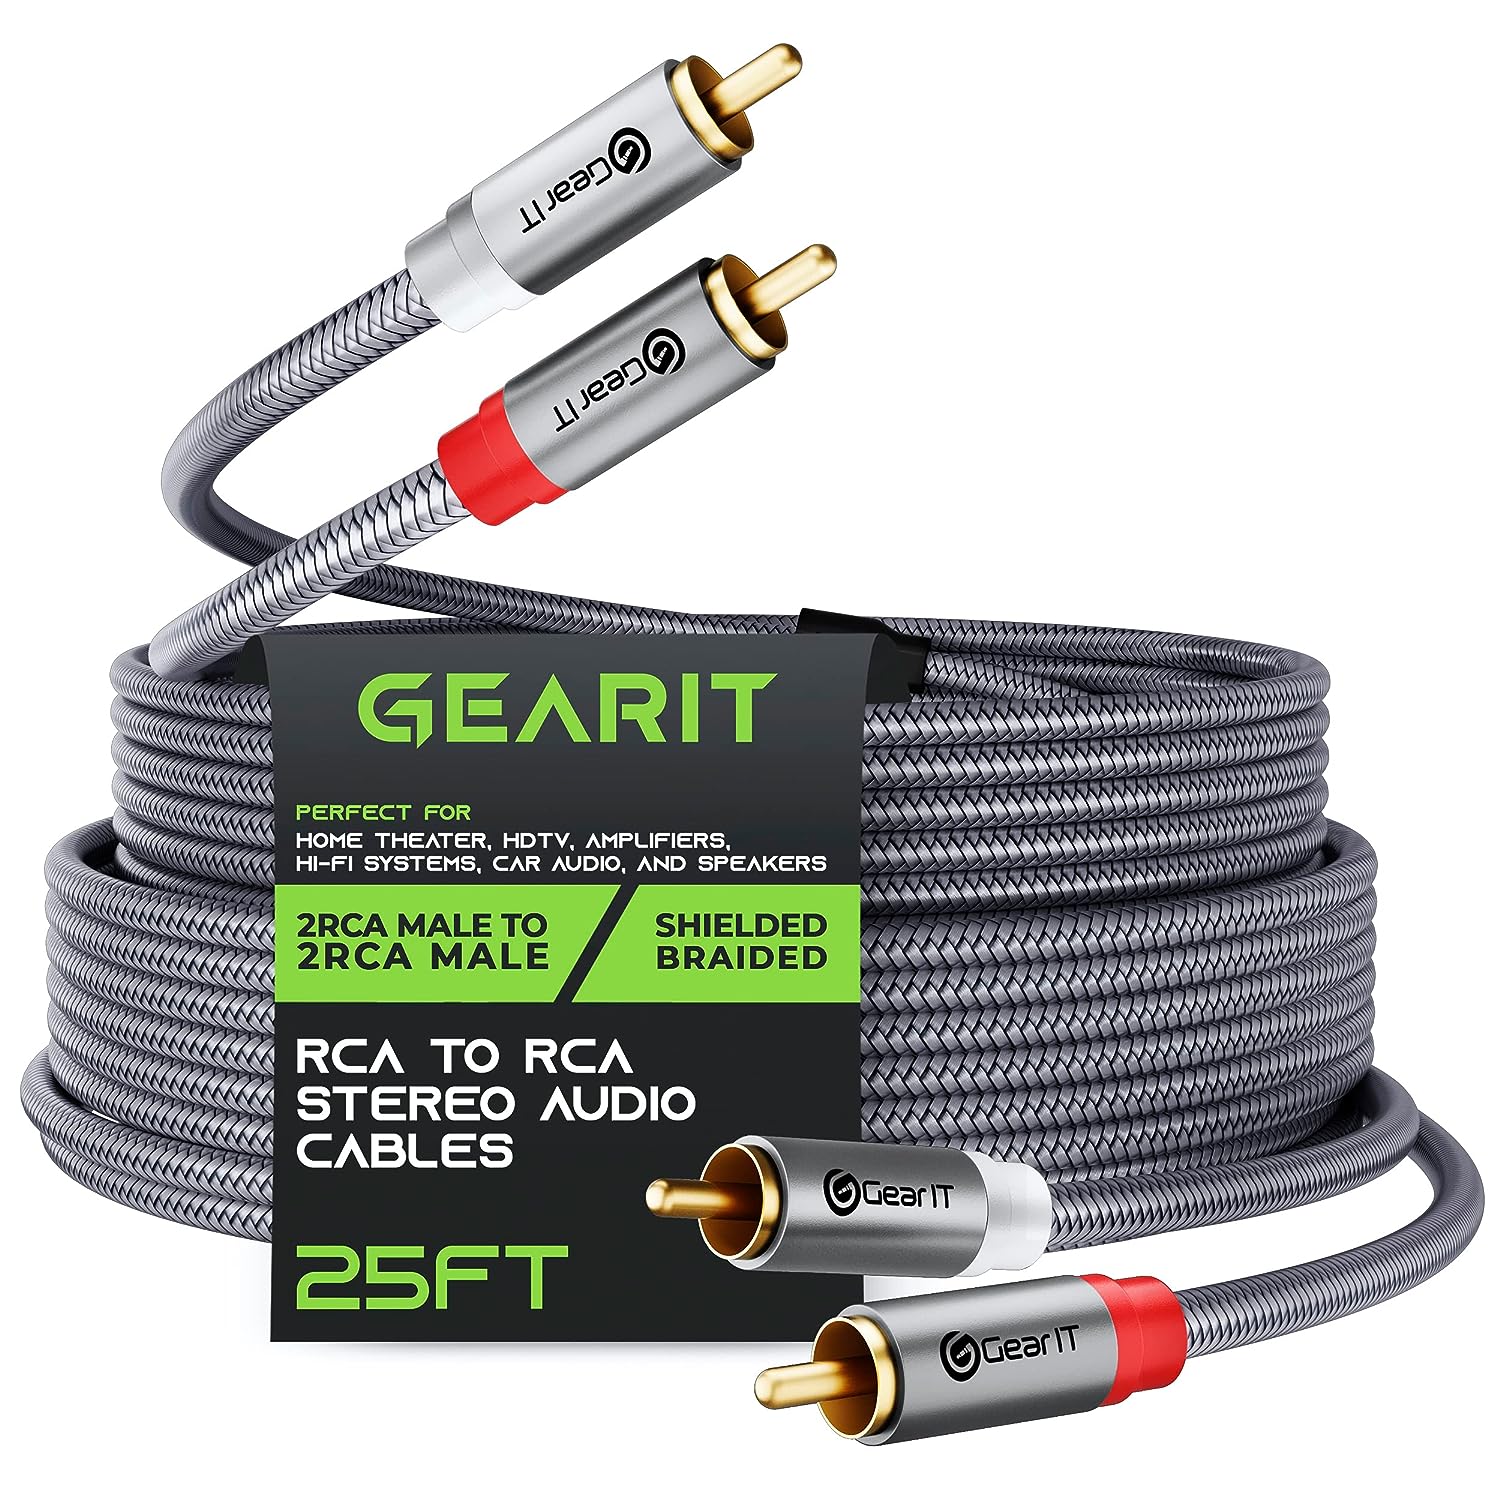 GearIT RCA Cable (25FT) 2RCA Male to 2RCA Male Stereo [...]